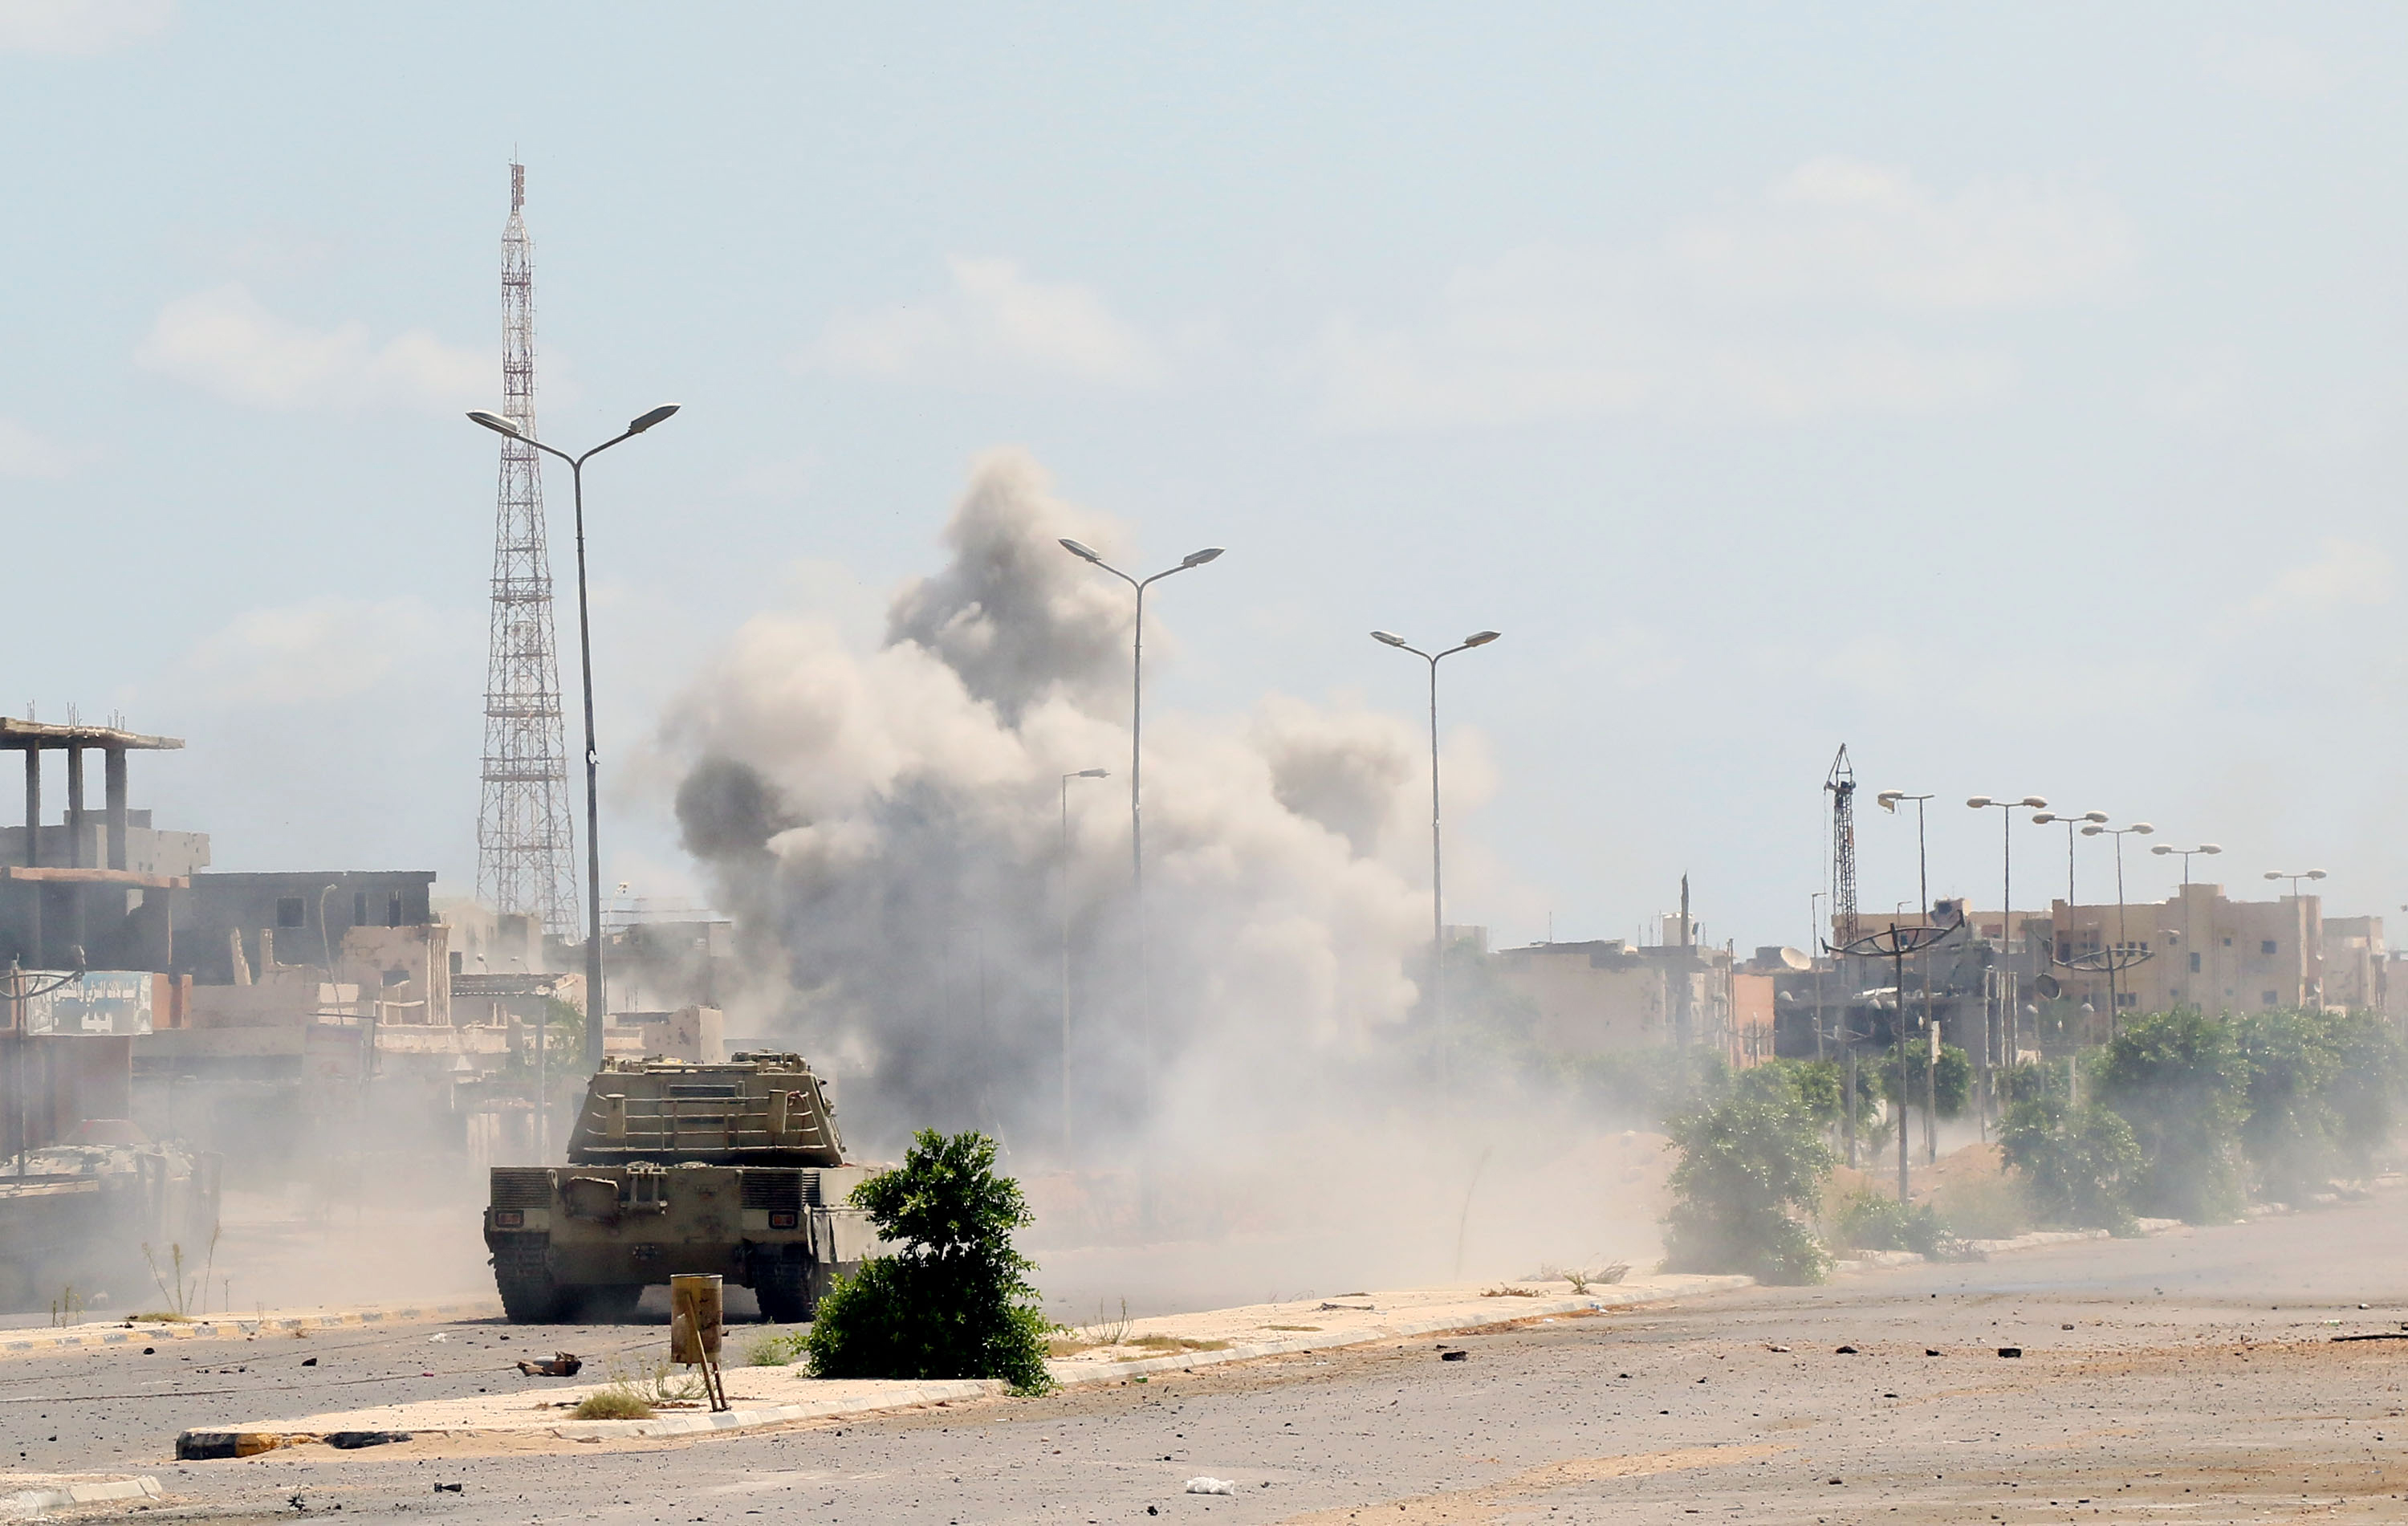 Forces loyal to Libya's UN-backed Government of National Accord (GNA) drive their military vehicle in al-Zaafaran neighbourhood as they fight Islamic State group (IS) jihadists holed up in residential district two on August 14, 2016 in Sirte, east of the capital Tripoli. (MAHMUD TURKIA—AFP/Getty Images)